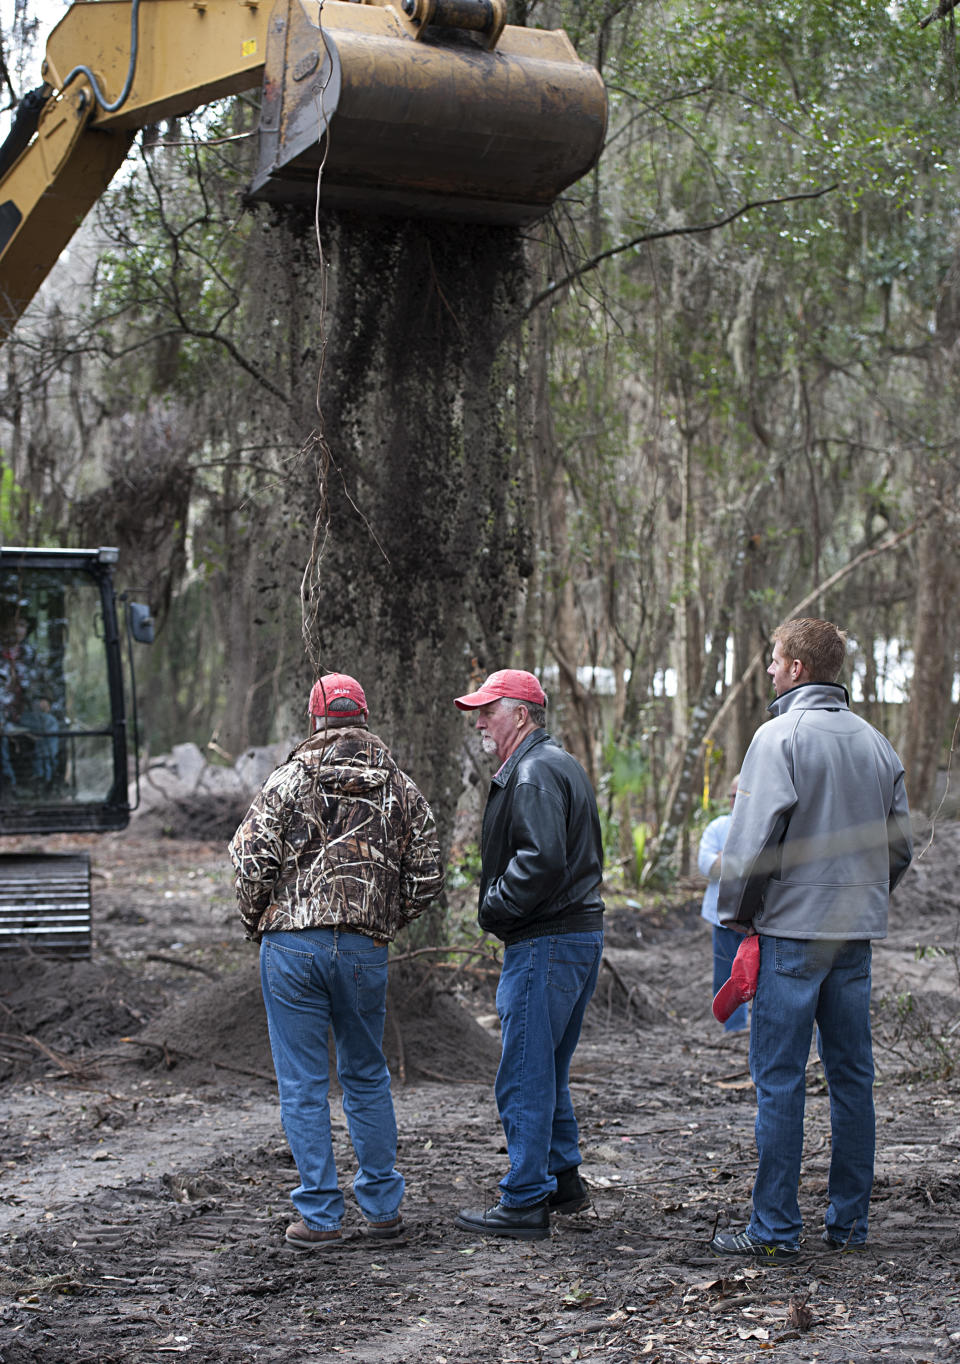 Patrick Sessions, center, and his son Jason, right, watch as Alachua County Sheriffs technicians use a back hoe Thursday, Feb. 2, 2014, in Gainesville, Fla., to dig for evidence in the 1989 disappearance of Tiffany Sessions, a University of Florida student. The sheriffs department announced they have linked the disappearance to Paul Rowles, a serial killer who died in prison last year. (AP Photo/Phil Sandlin)